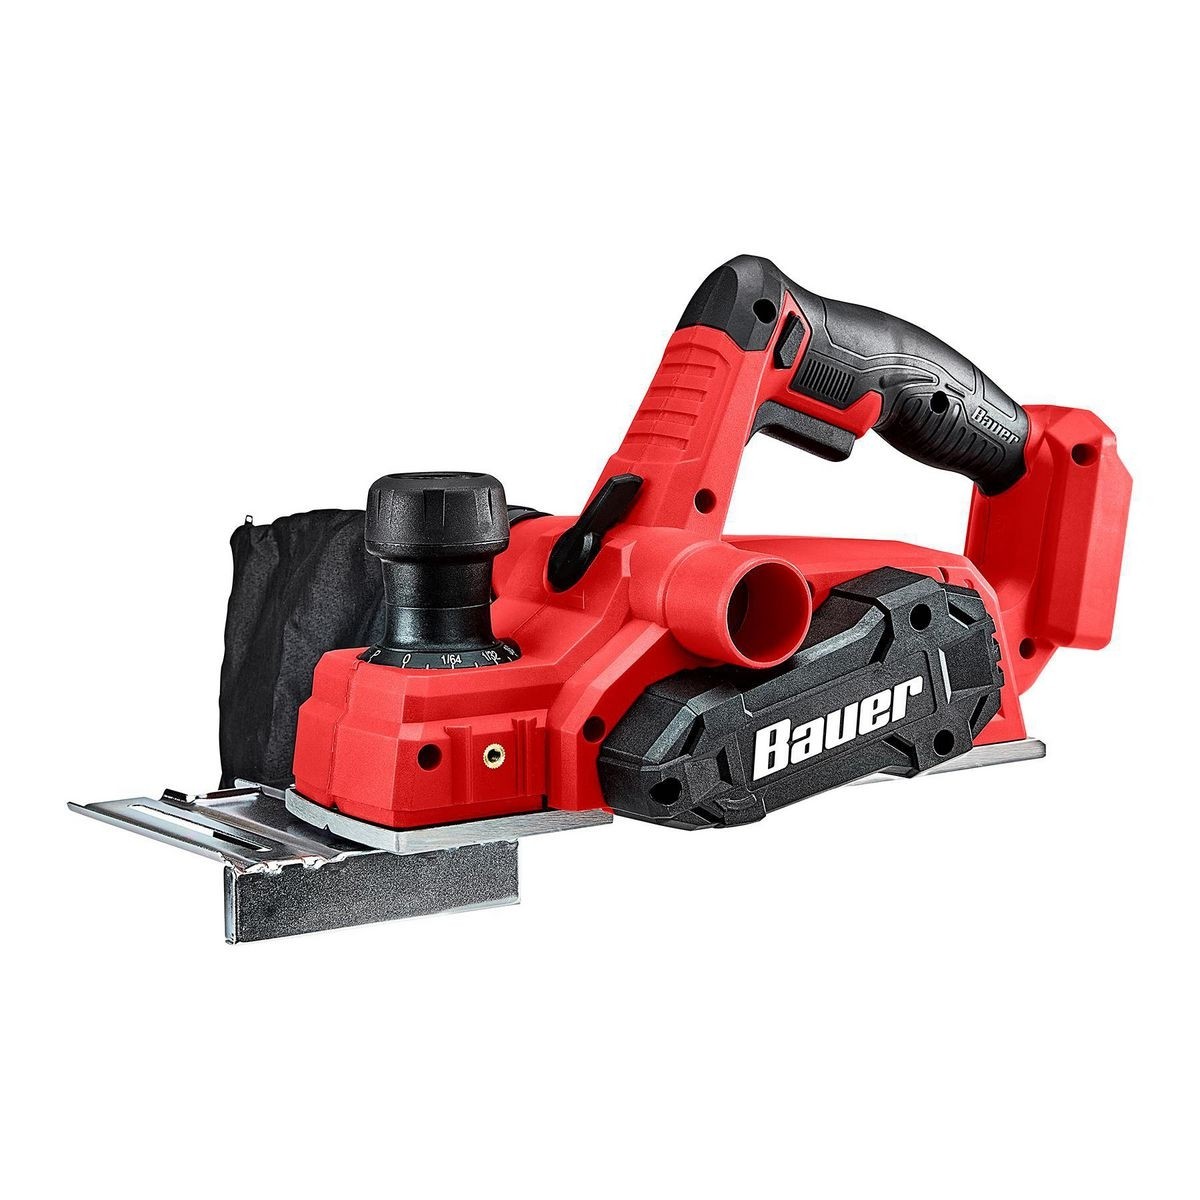 BAUER 20V Cordless 3-1/4 in. Planer – Tool Only – Item 57777 